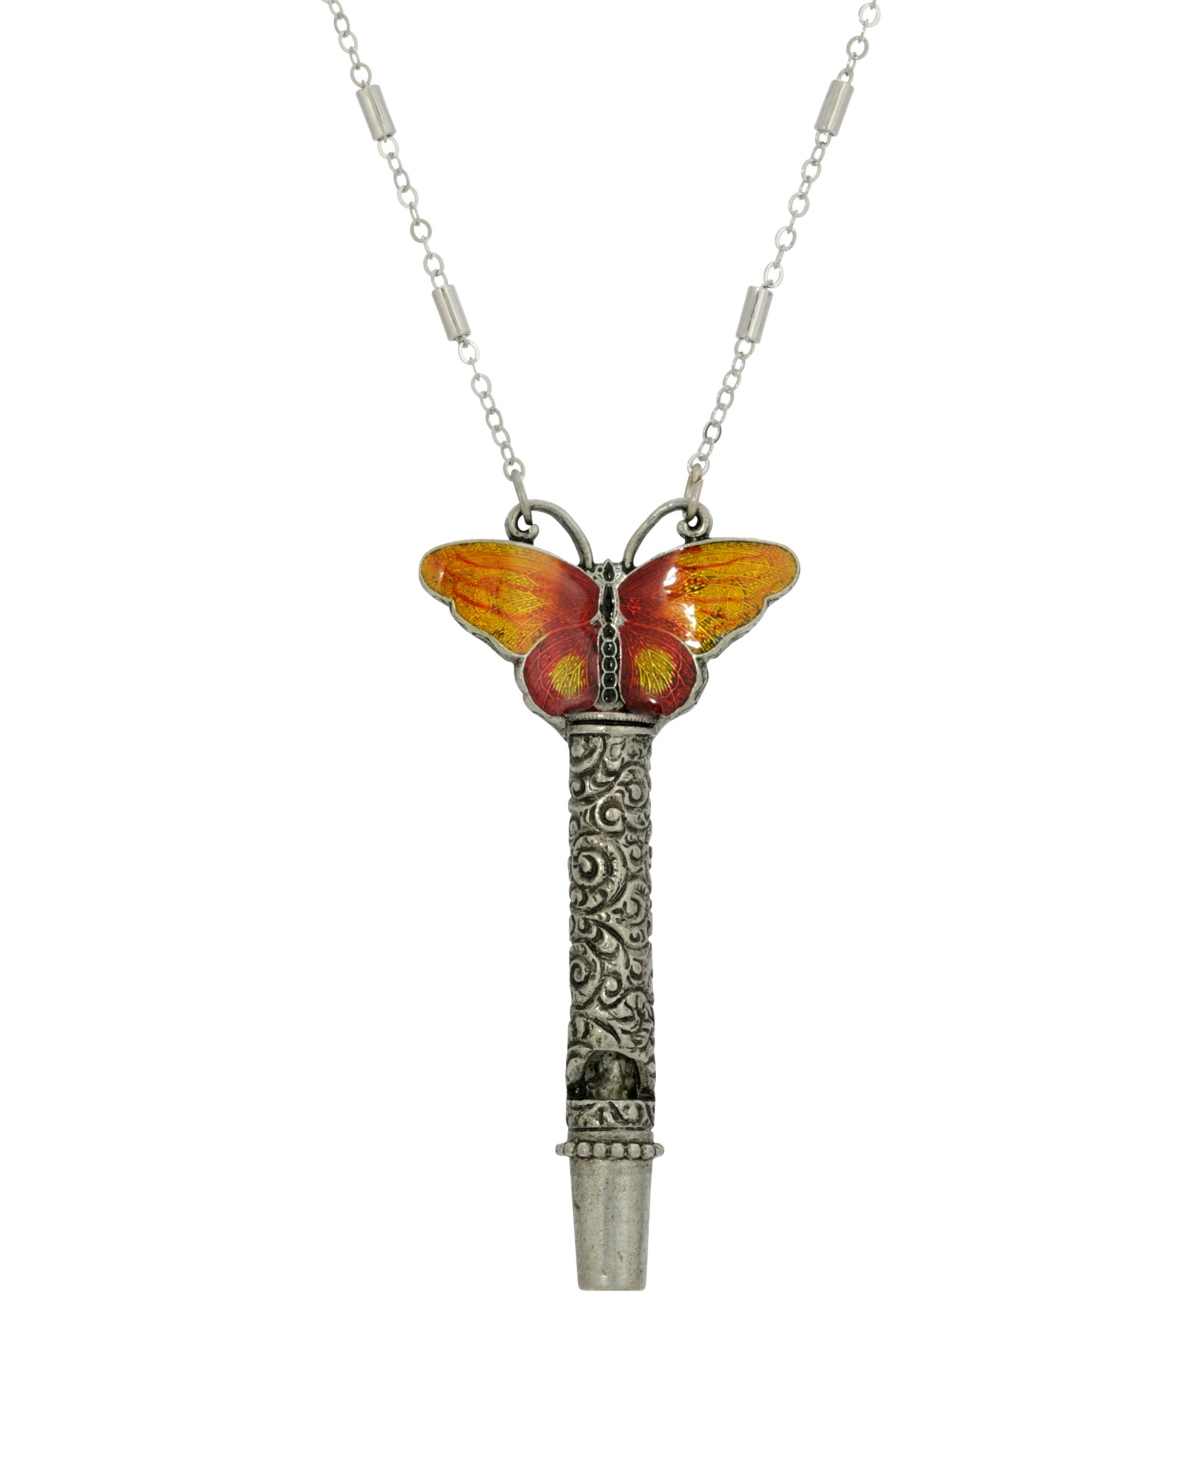 2028 Women's Pewter Whistle With Orange Yellow Enamel Butterfly Necklace